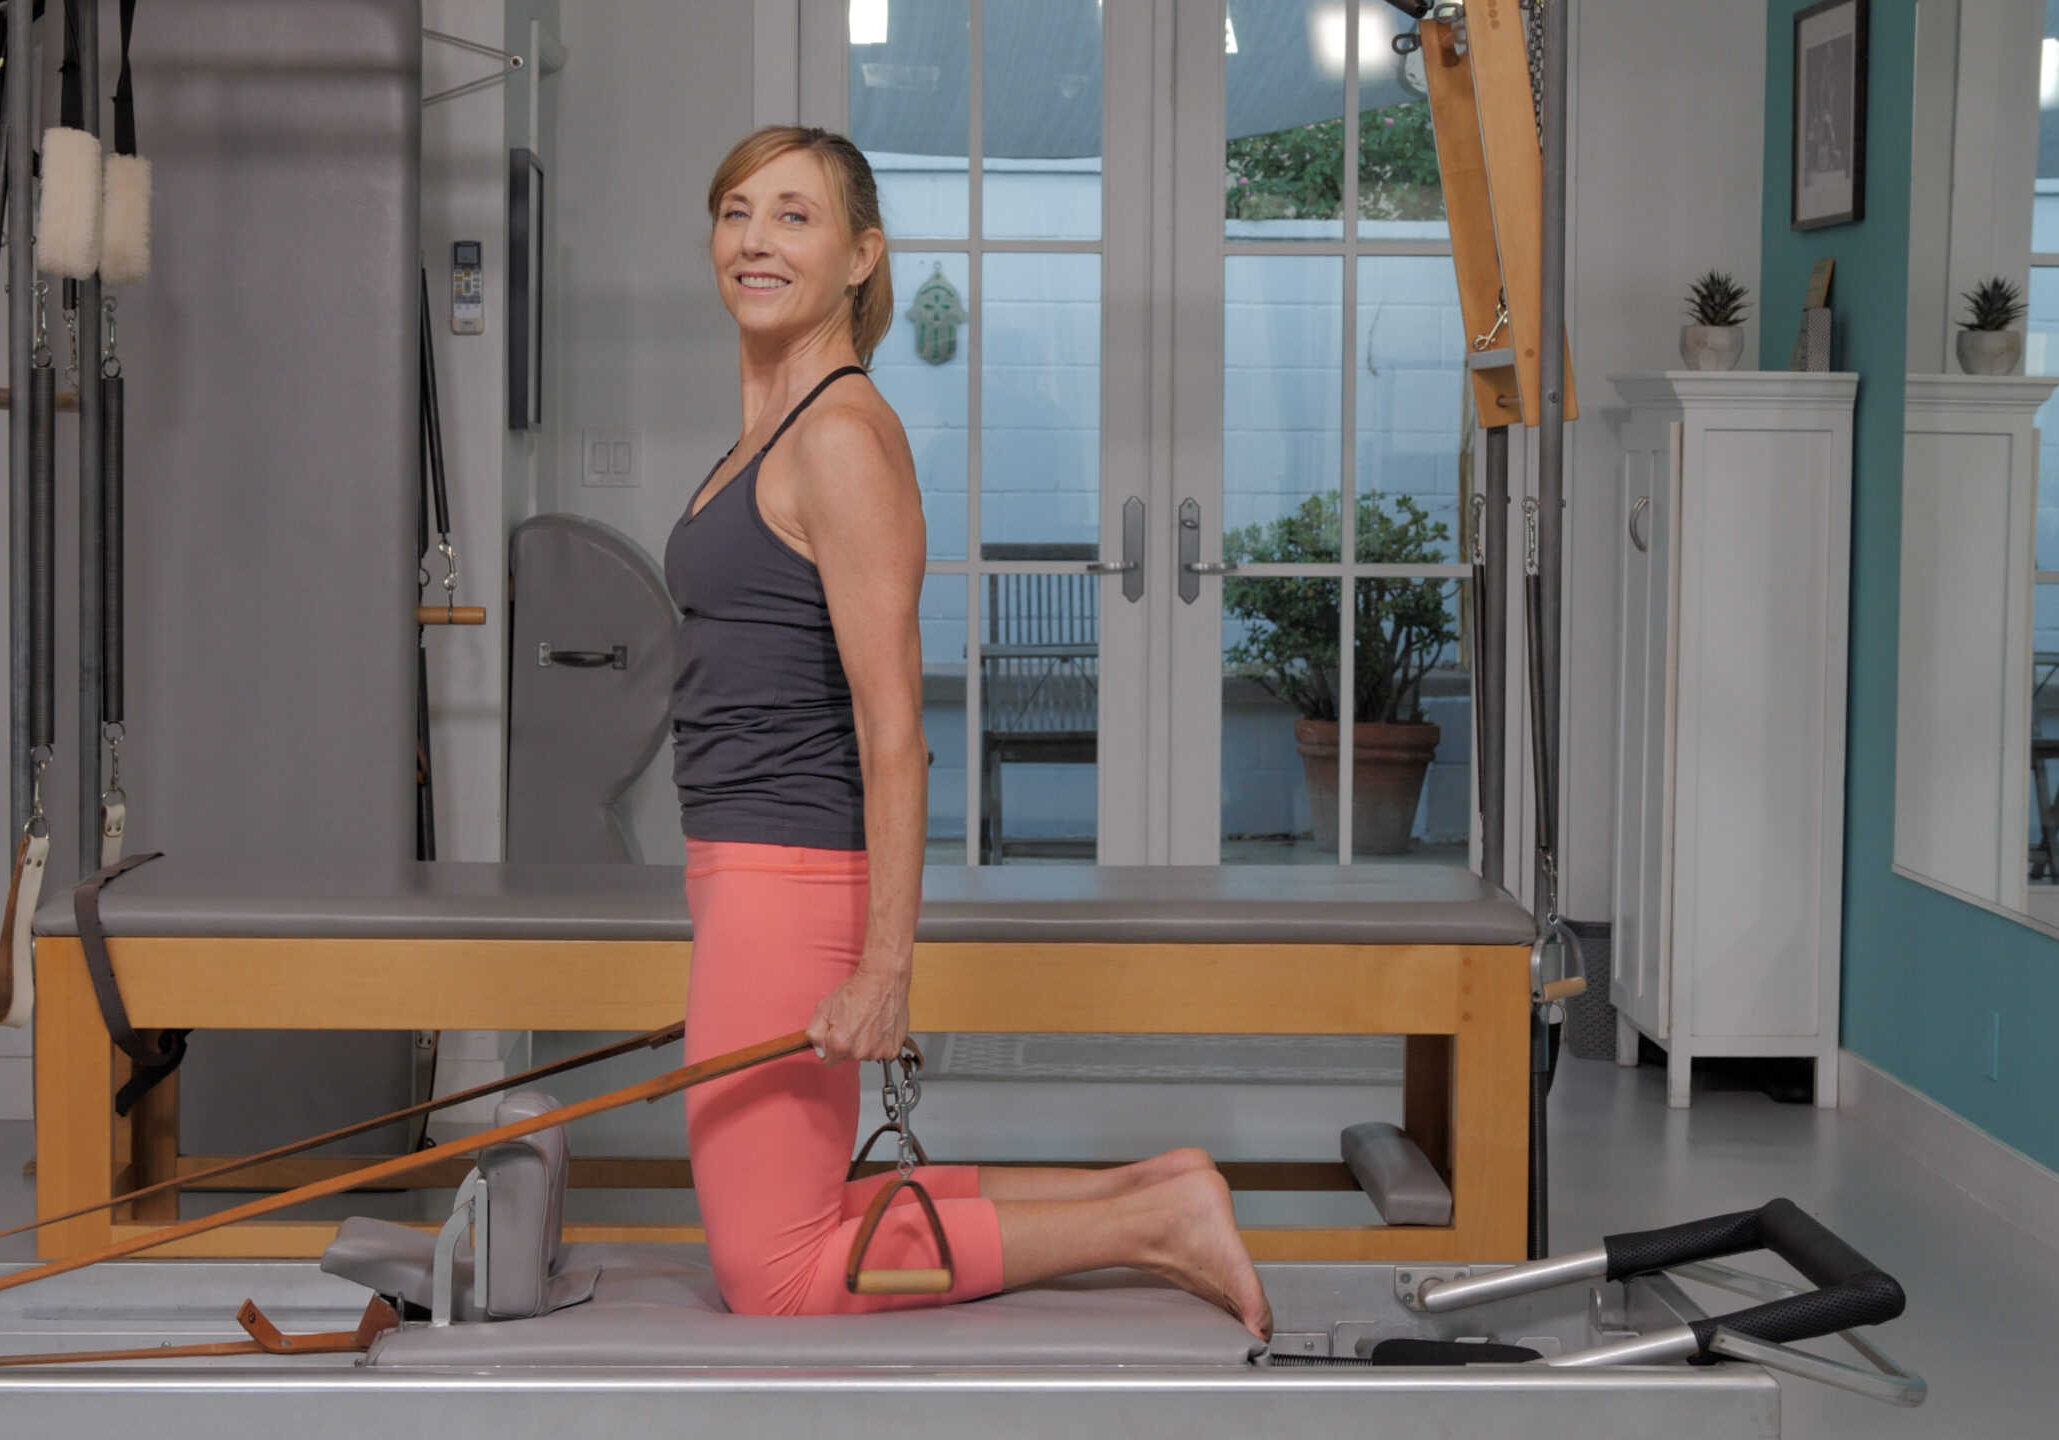 Chest Expansion on the Reformer